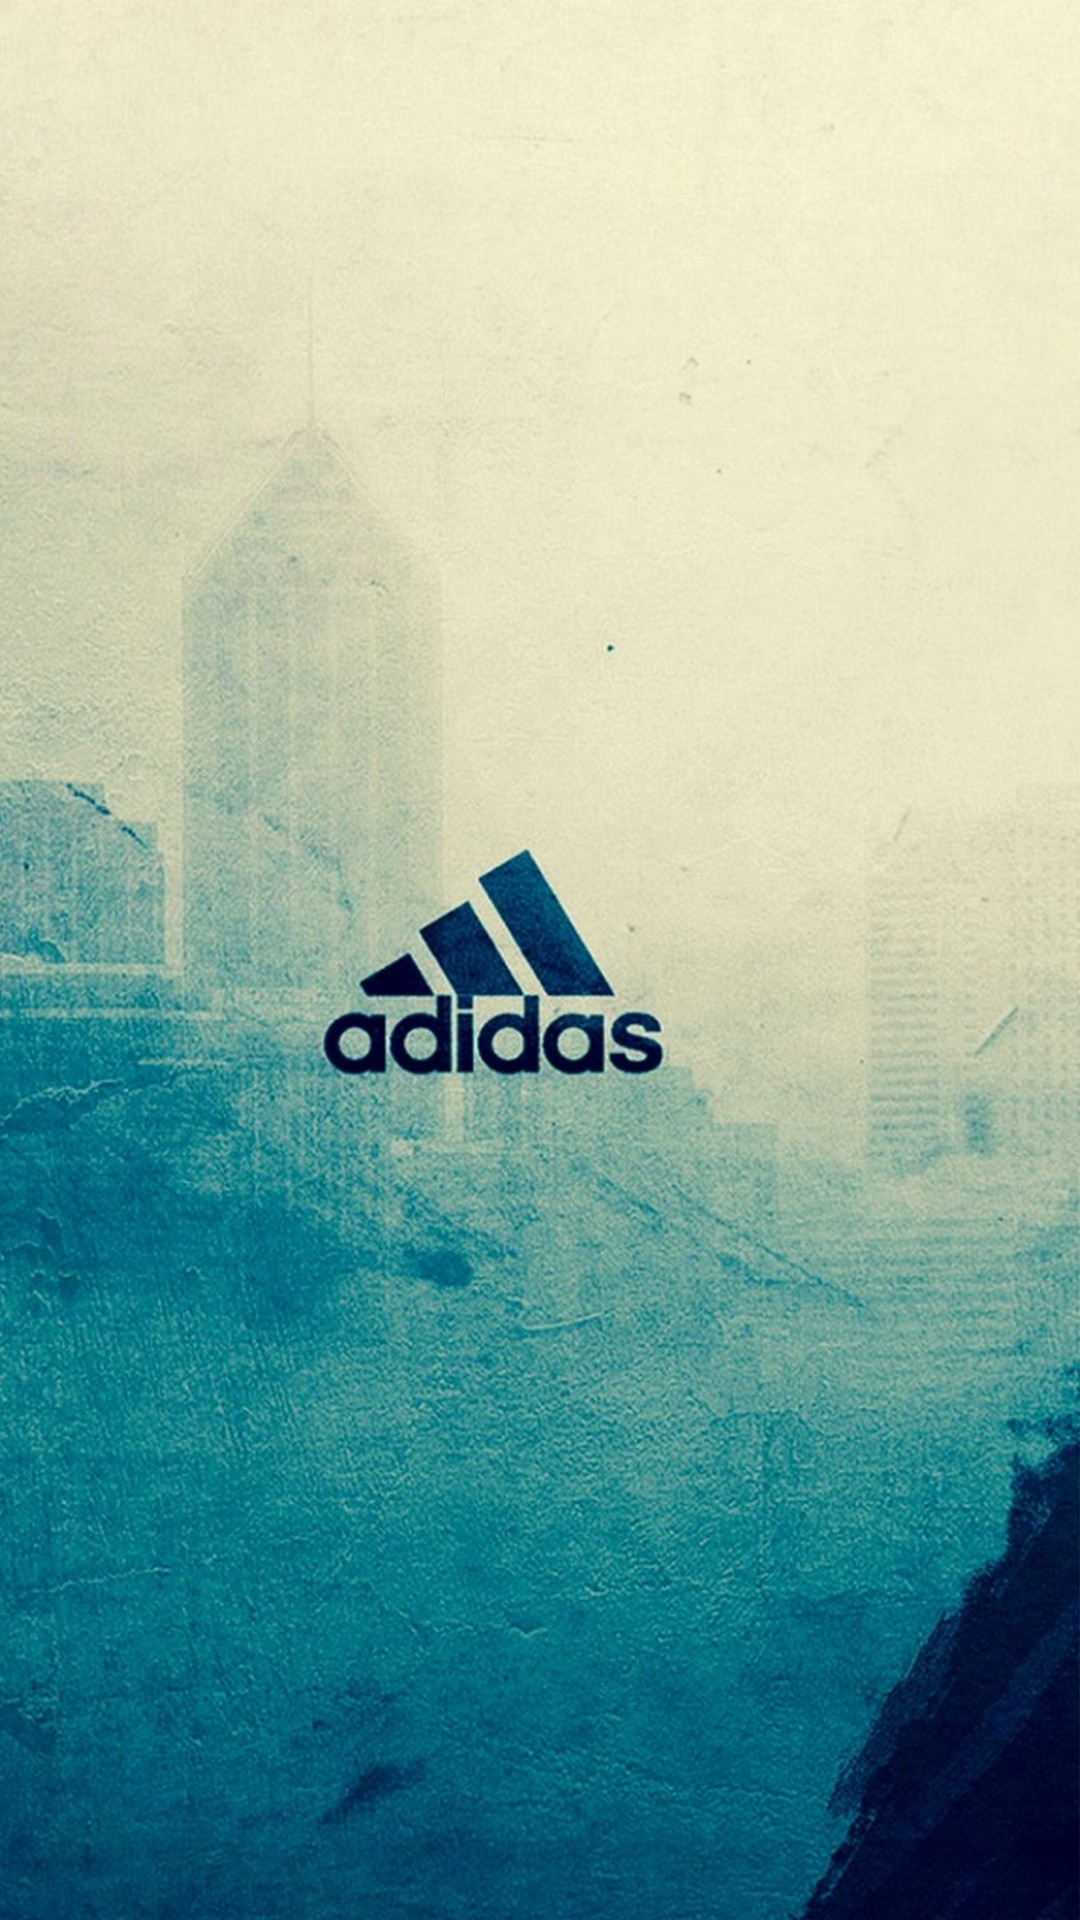 Adidas Logo Wallpaper for Phones with high-resolution 1080x1920 pixel. Download all Mobile Wallpapers and Use them as wallpapers for your iPhone, Tablet, iPad, Android and other mobile devices